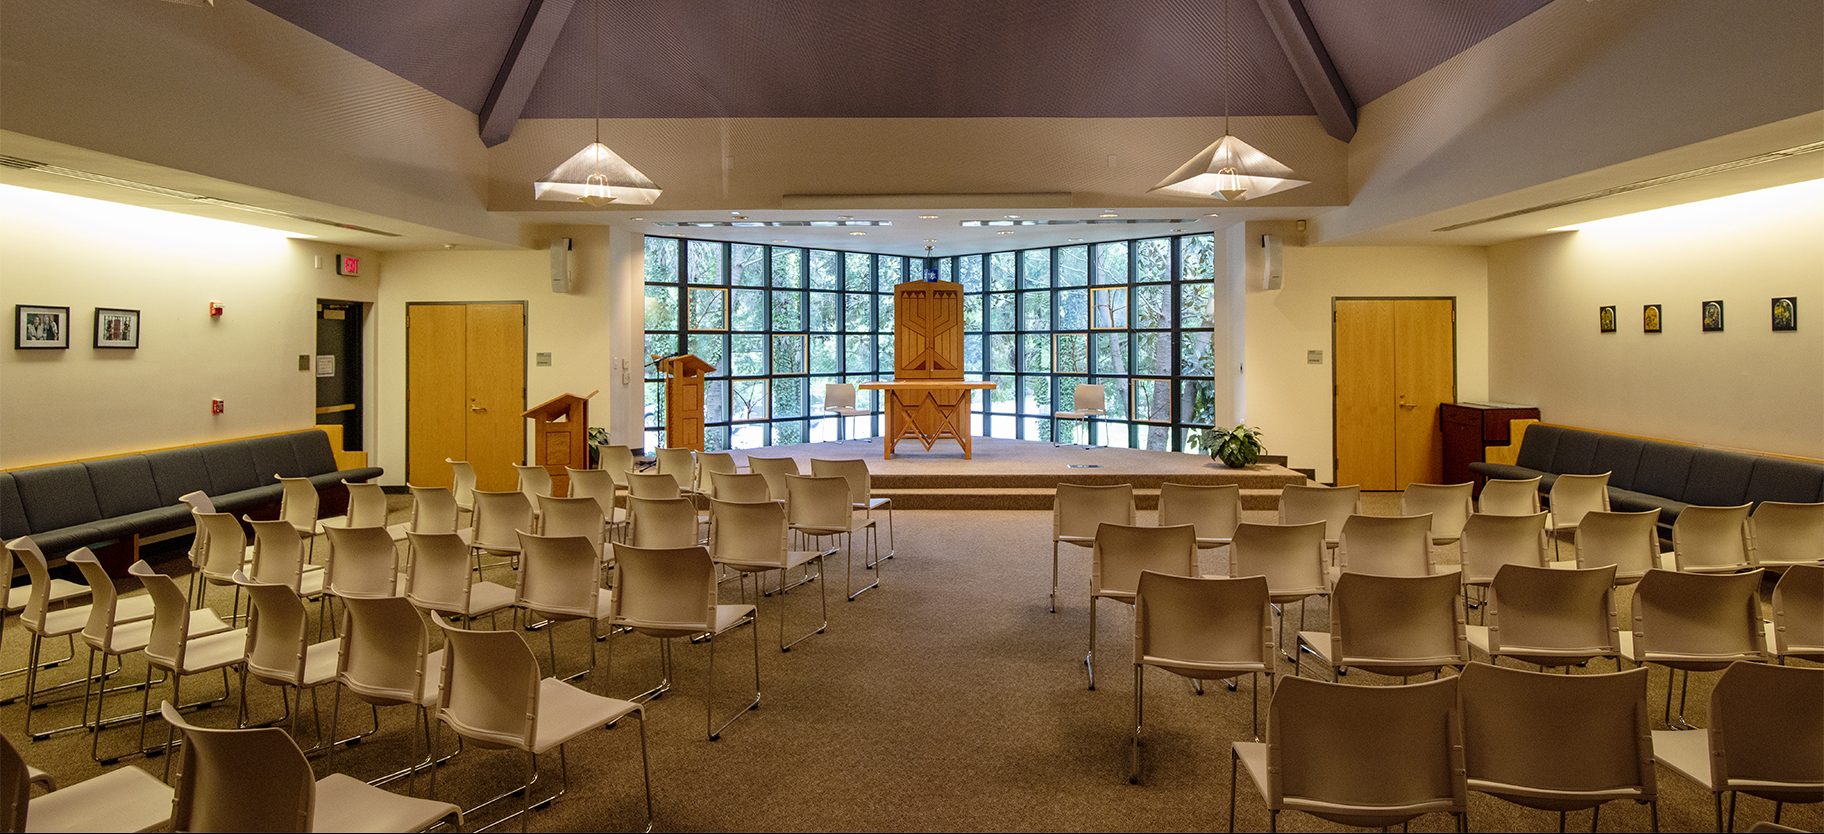 The sanctuary at the Freeman Center for Jewish Life